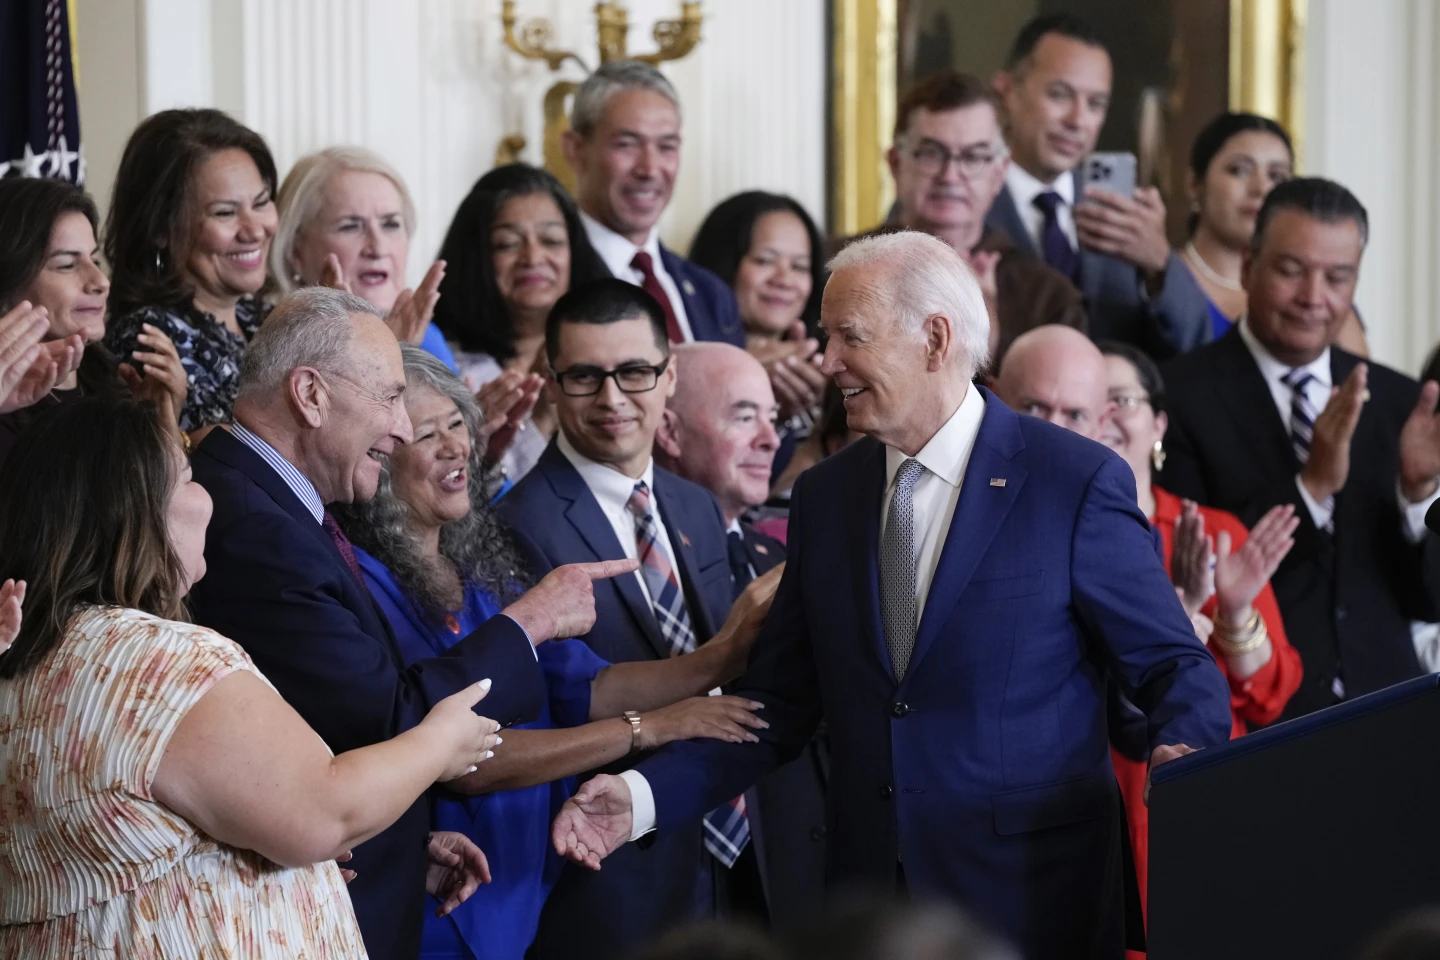 who-can-benefit-from-president-biden’s-new-immigration-executive-action?